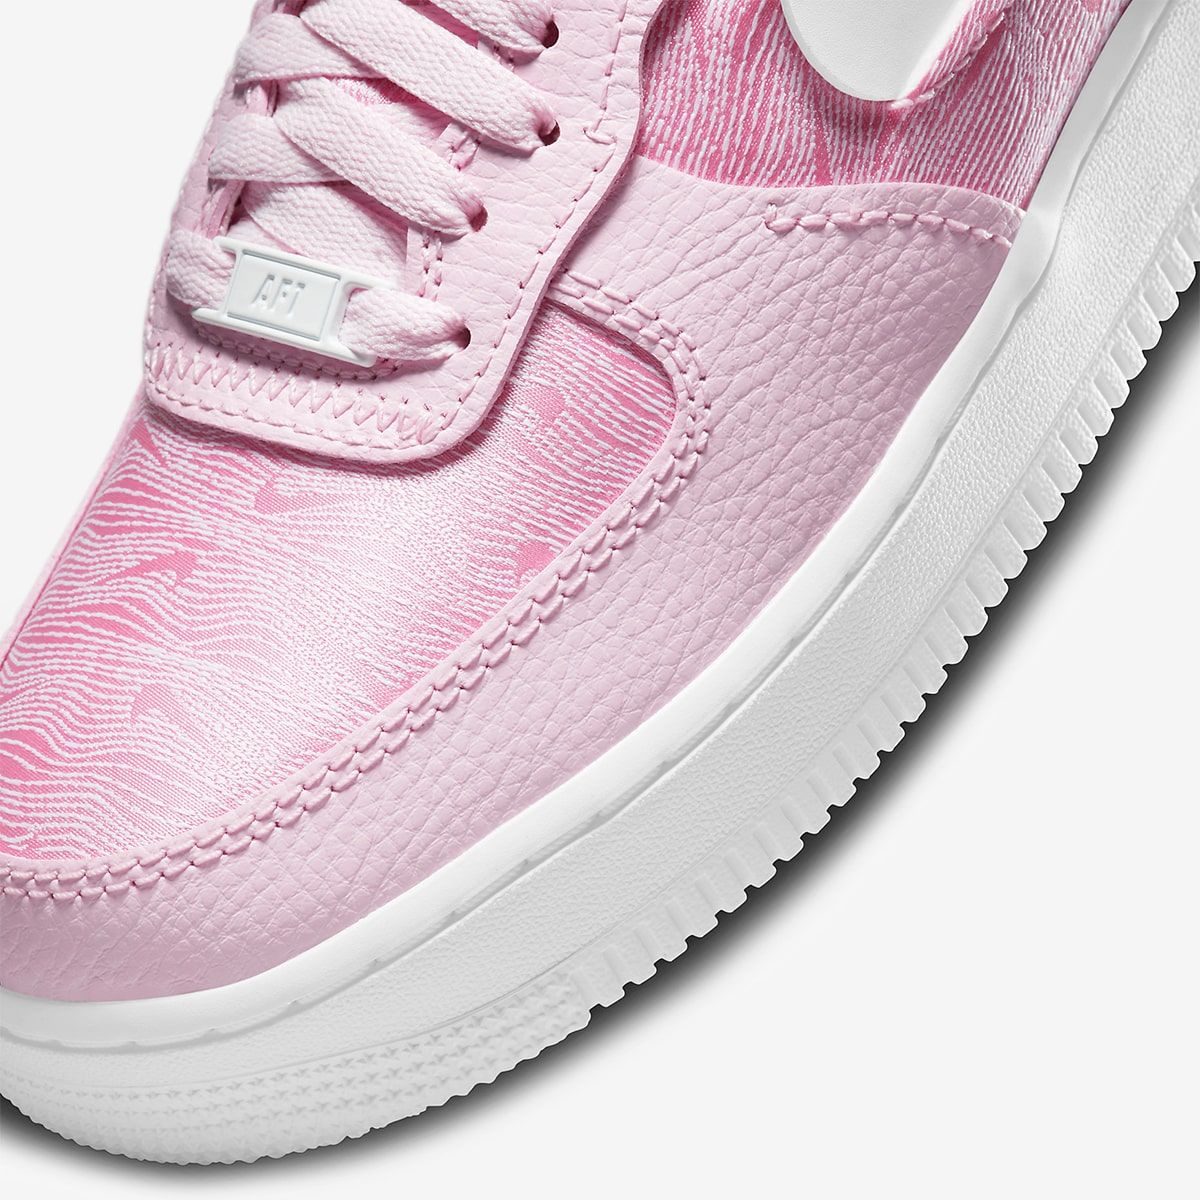 Nike Presents the Air Force 1 Low LXX in 